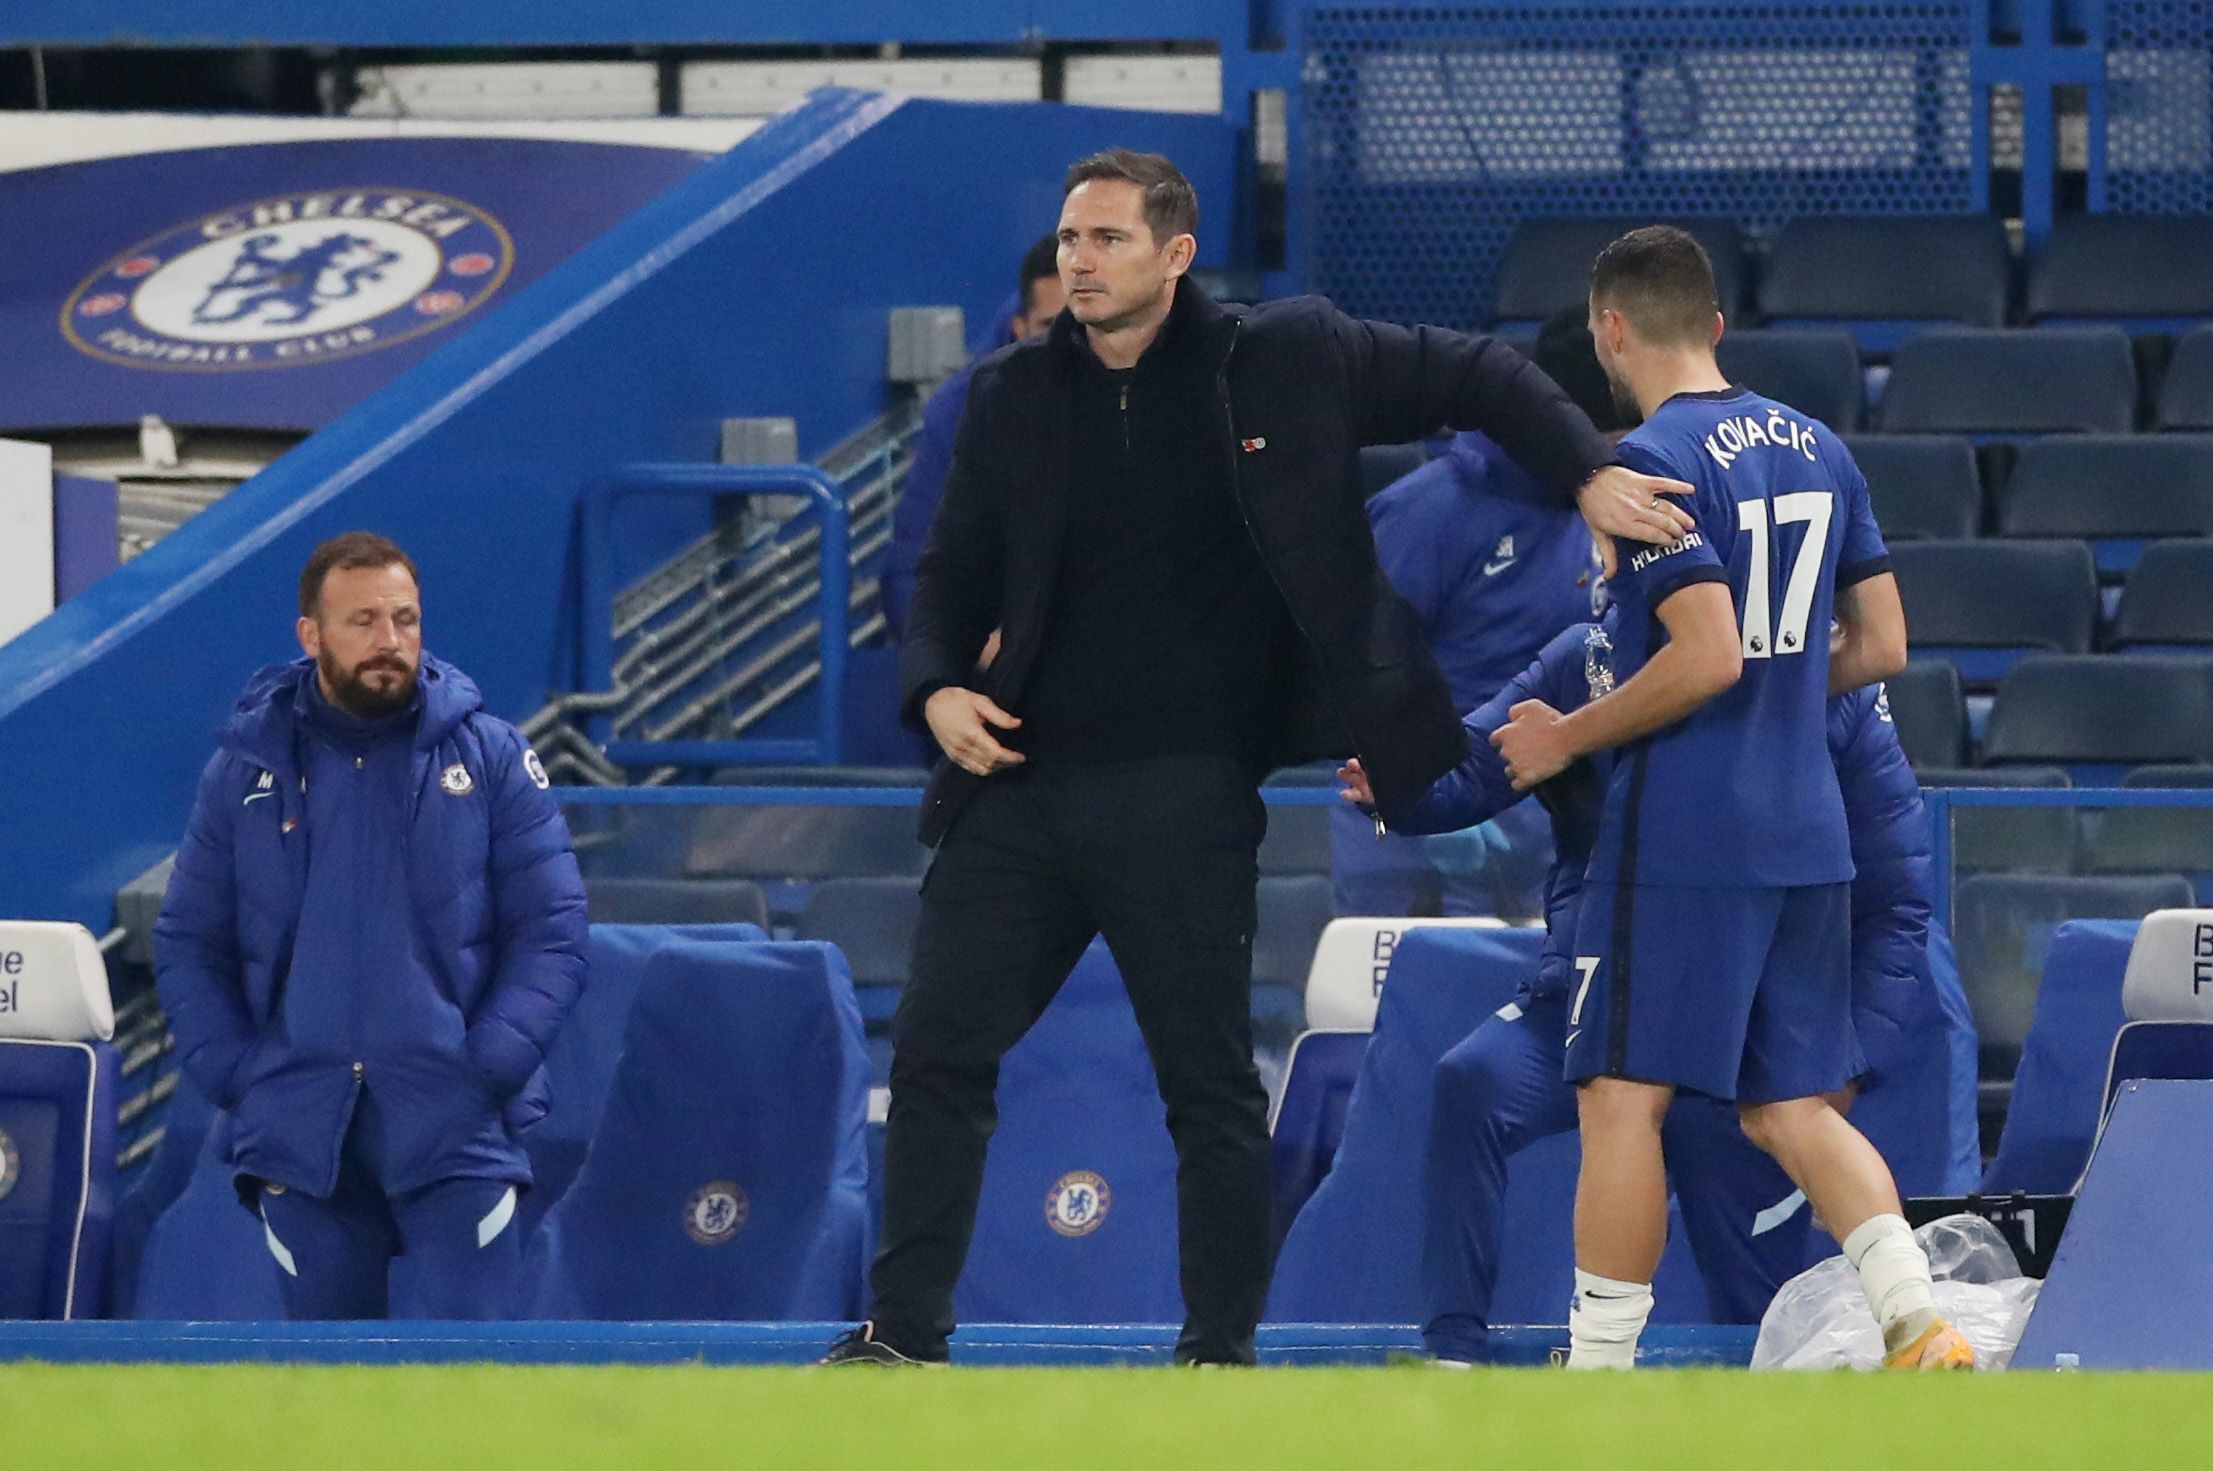 Soccer Football - Premier League - Chelsea v Sheffield United - Stamford Bridge, London, Britain - November 7, 2020 Chelsea manager Frank Lampard with Mateo Kovacic after he is substituted off Pool via REUTERS/Peter Cziborra EDITORIAL USE ONLY. No use with unauthorized audio, video, data, fixture lists, club/league logos or 'live' services. Online in-match use limited to 75 images, no video emulation. No use in betting, games or single club /league/player publications.  Please contact your accou